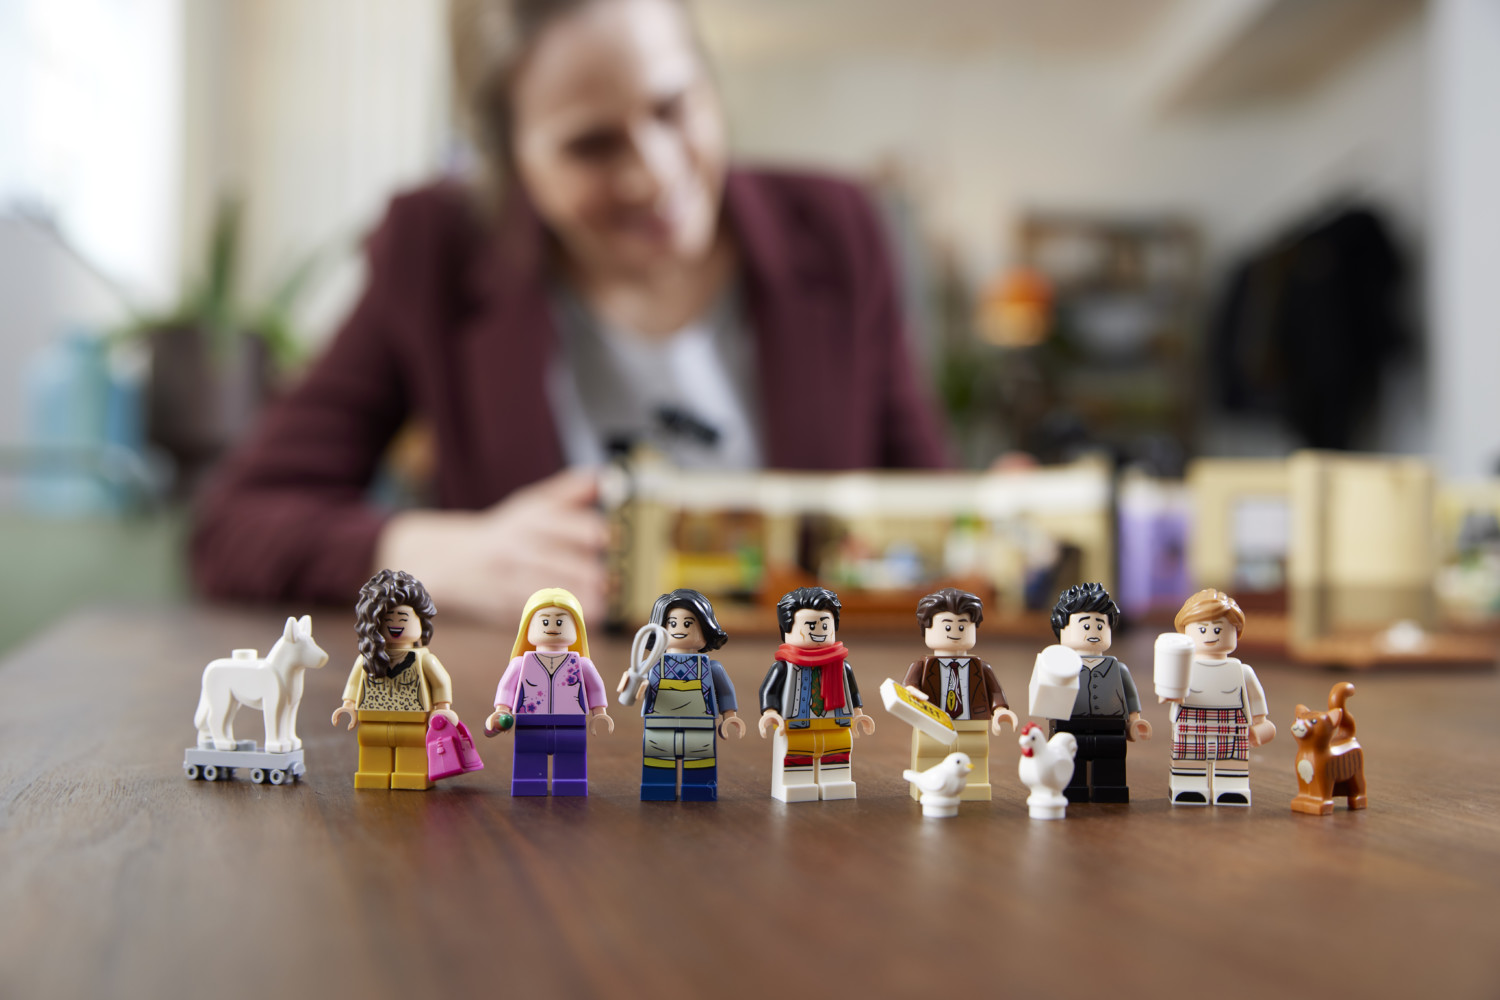 New 'Friends' apartments Lego set includes characters and props